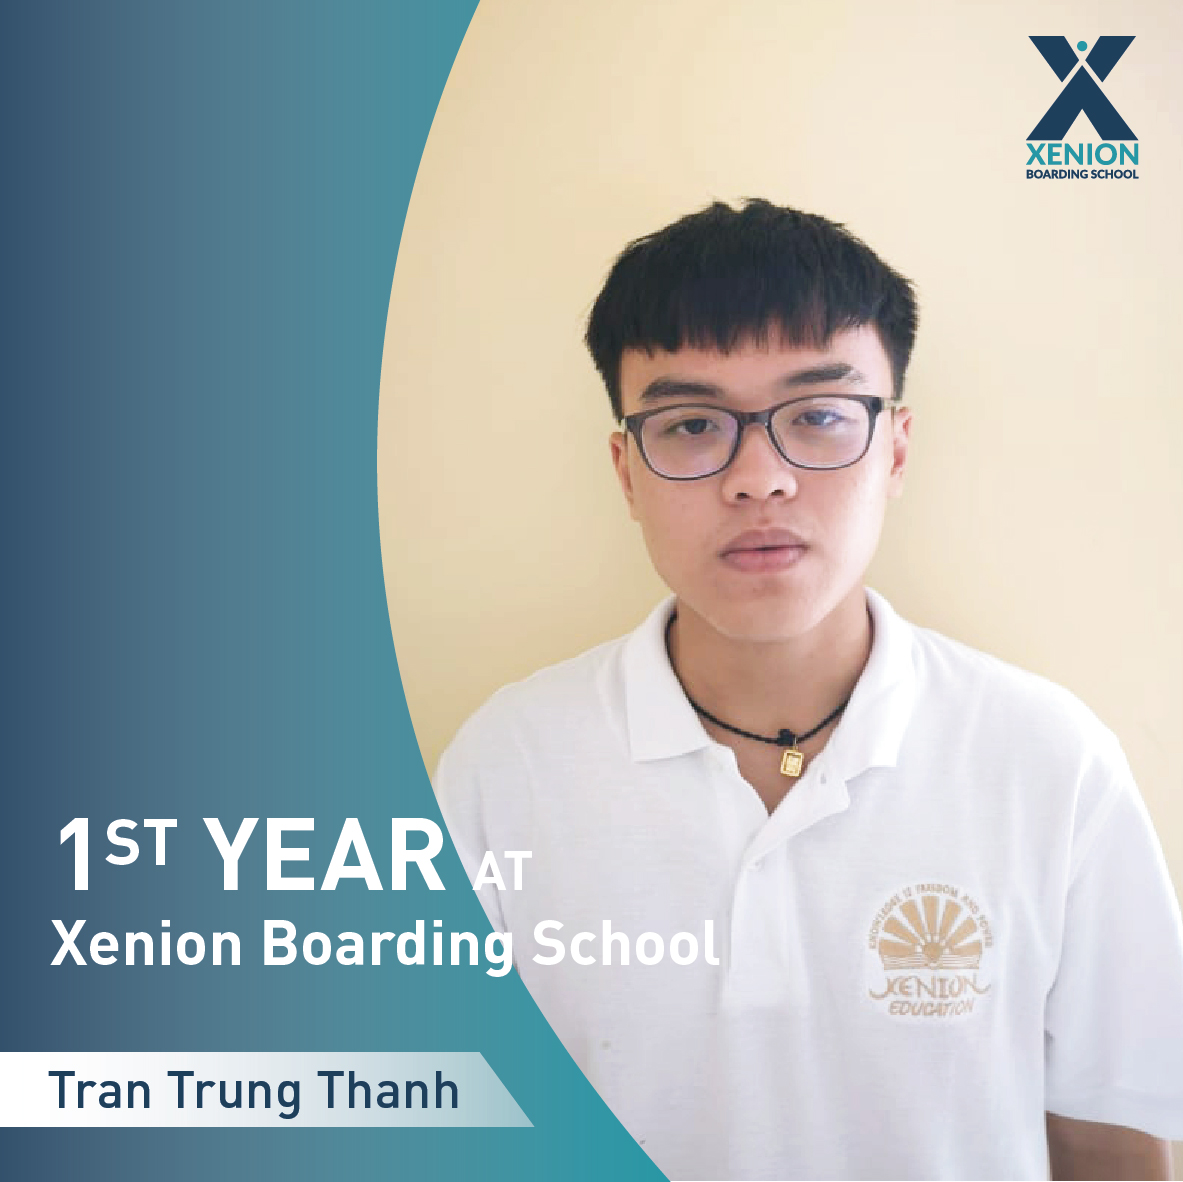 1st year at Xenion Boarding School - Tran Trung Thanh